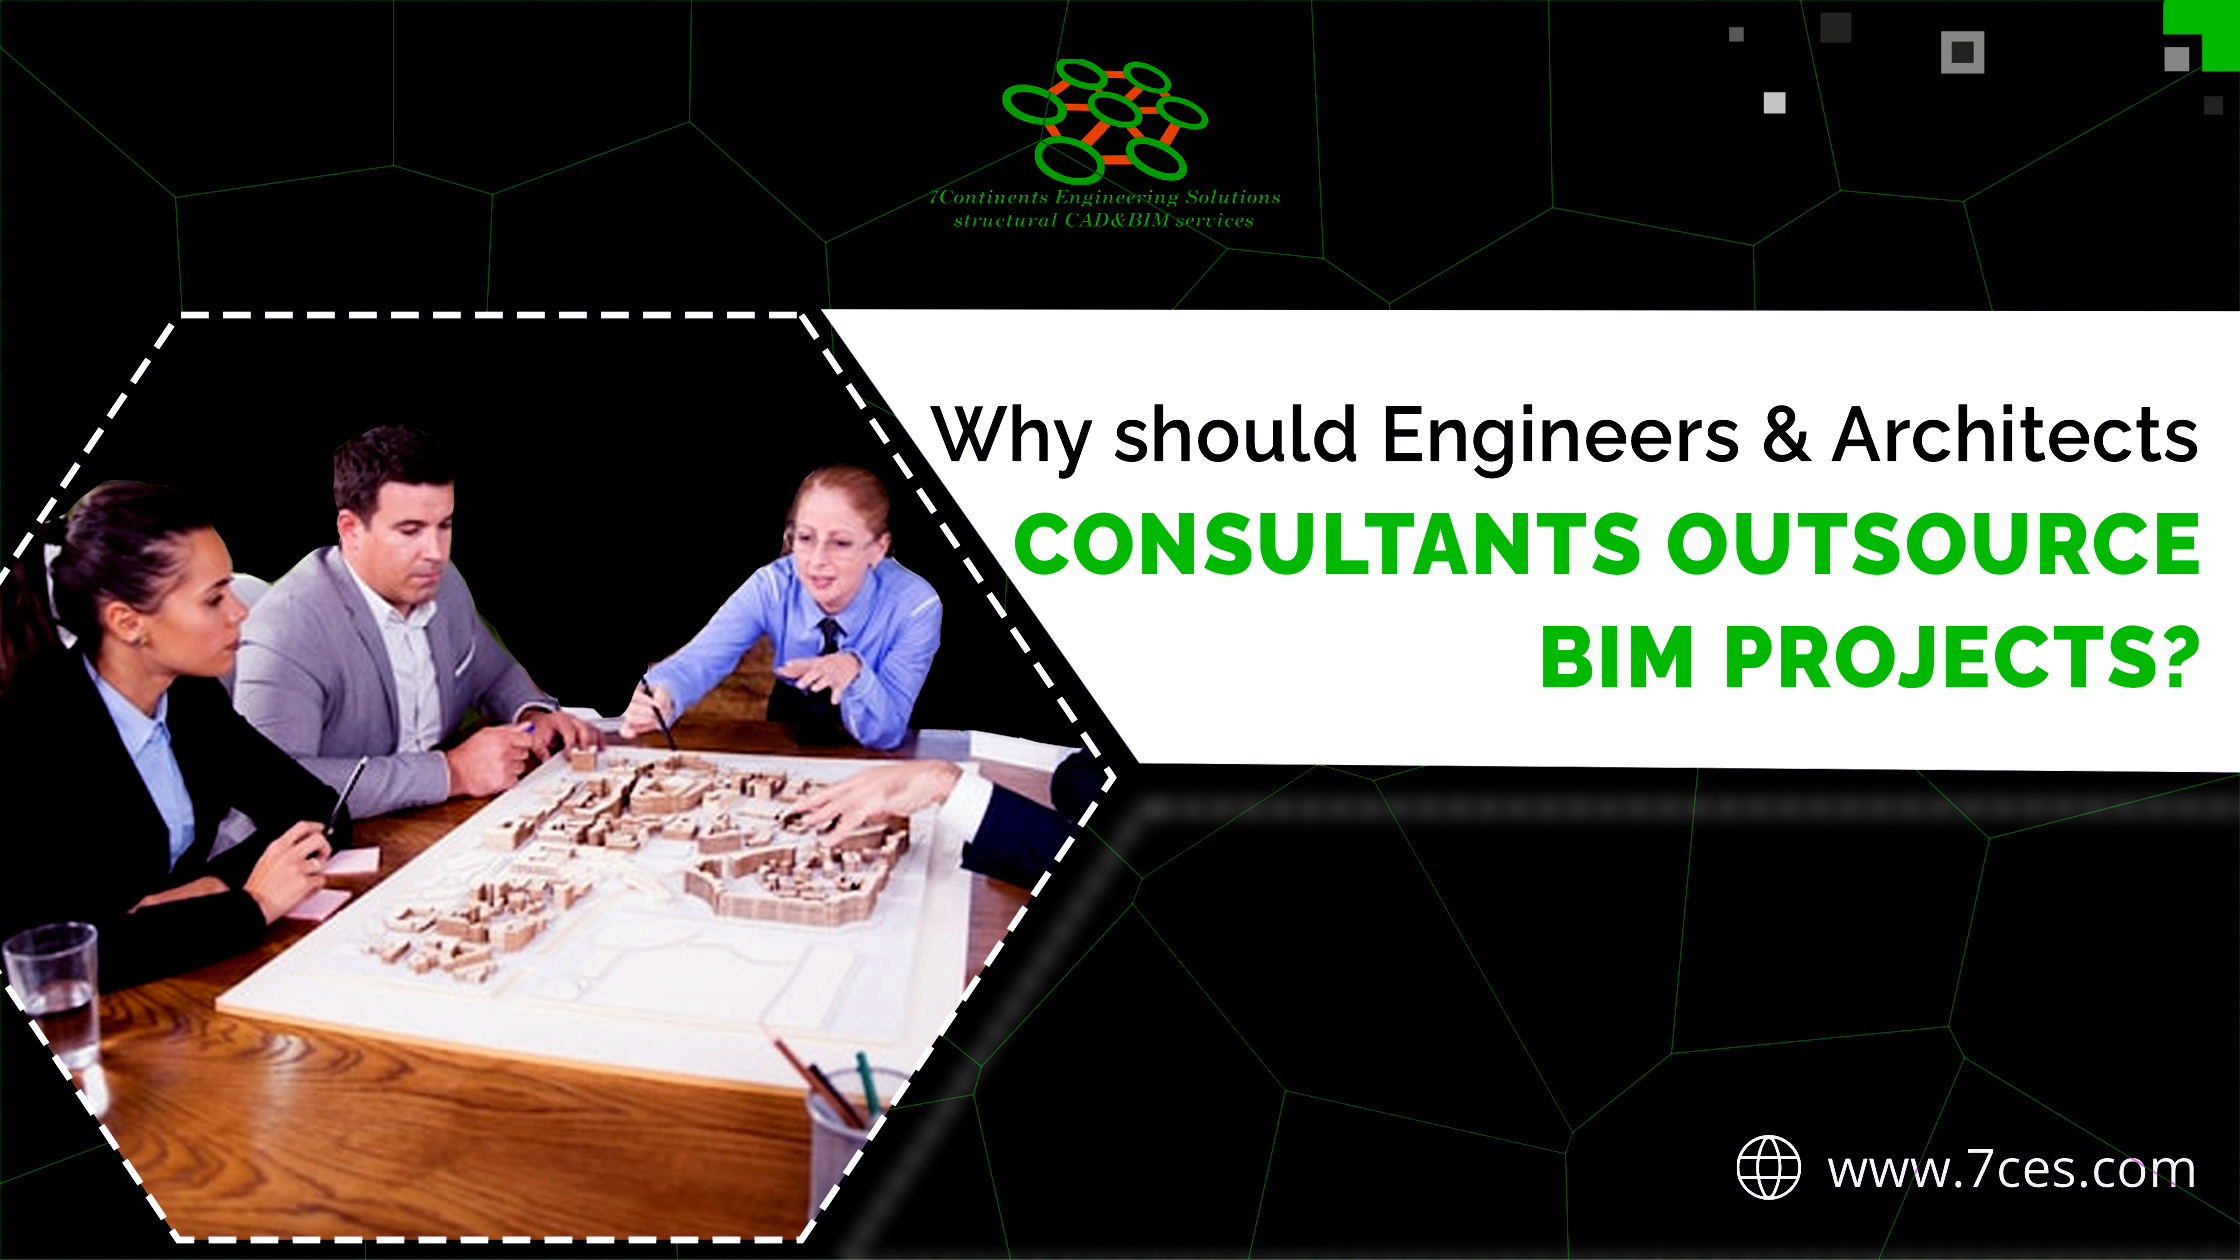 Why should Engineers & Architects Consultants outsource BIM Projects?